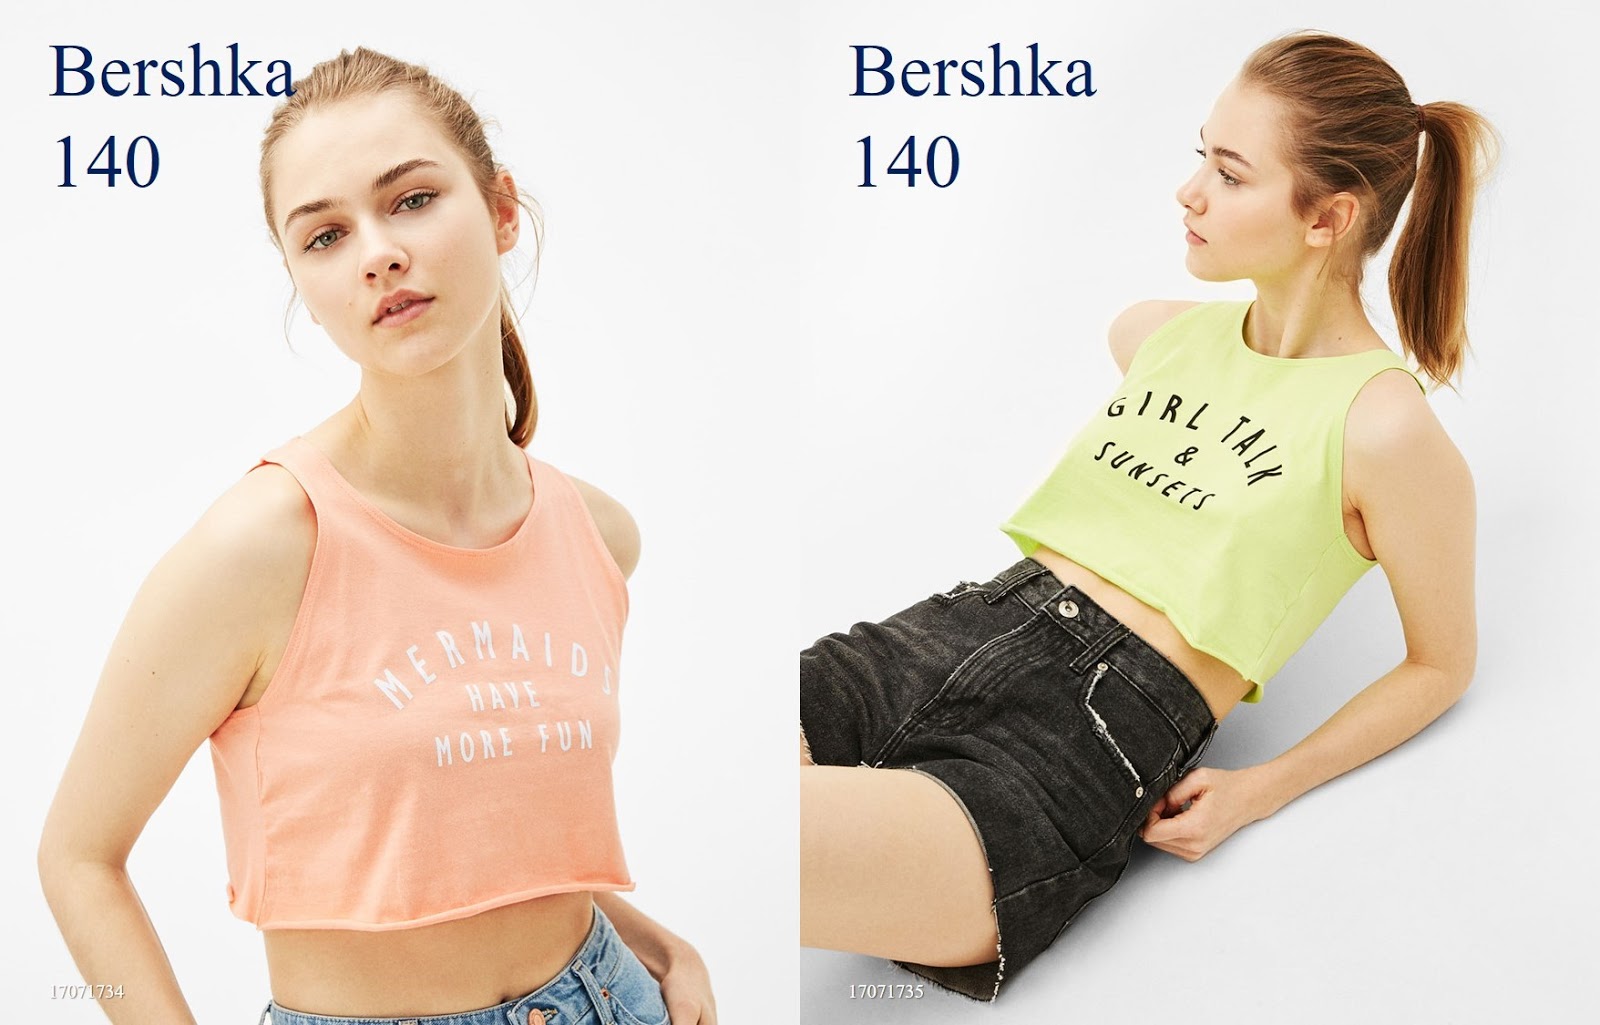 Discover The Sensuous Side Of Bershka's Latest Fashion Trends